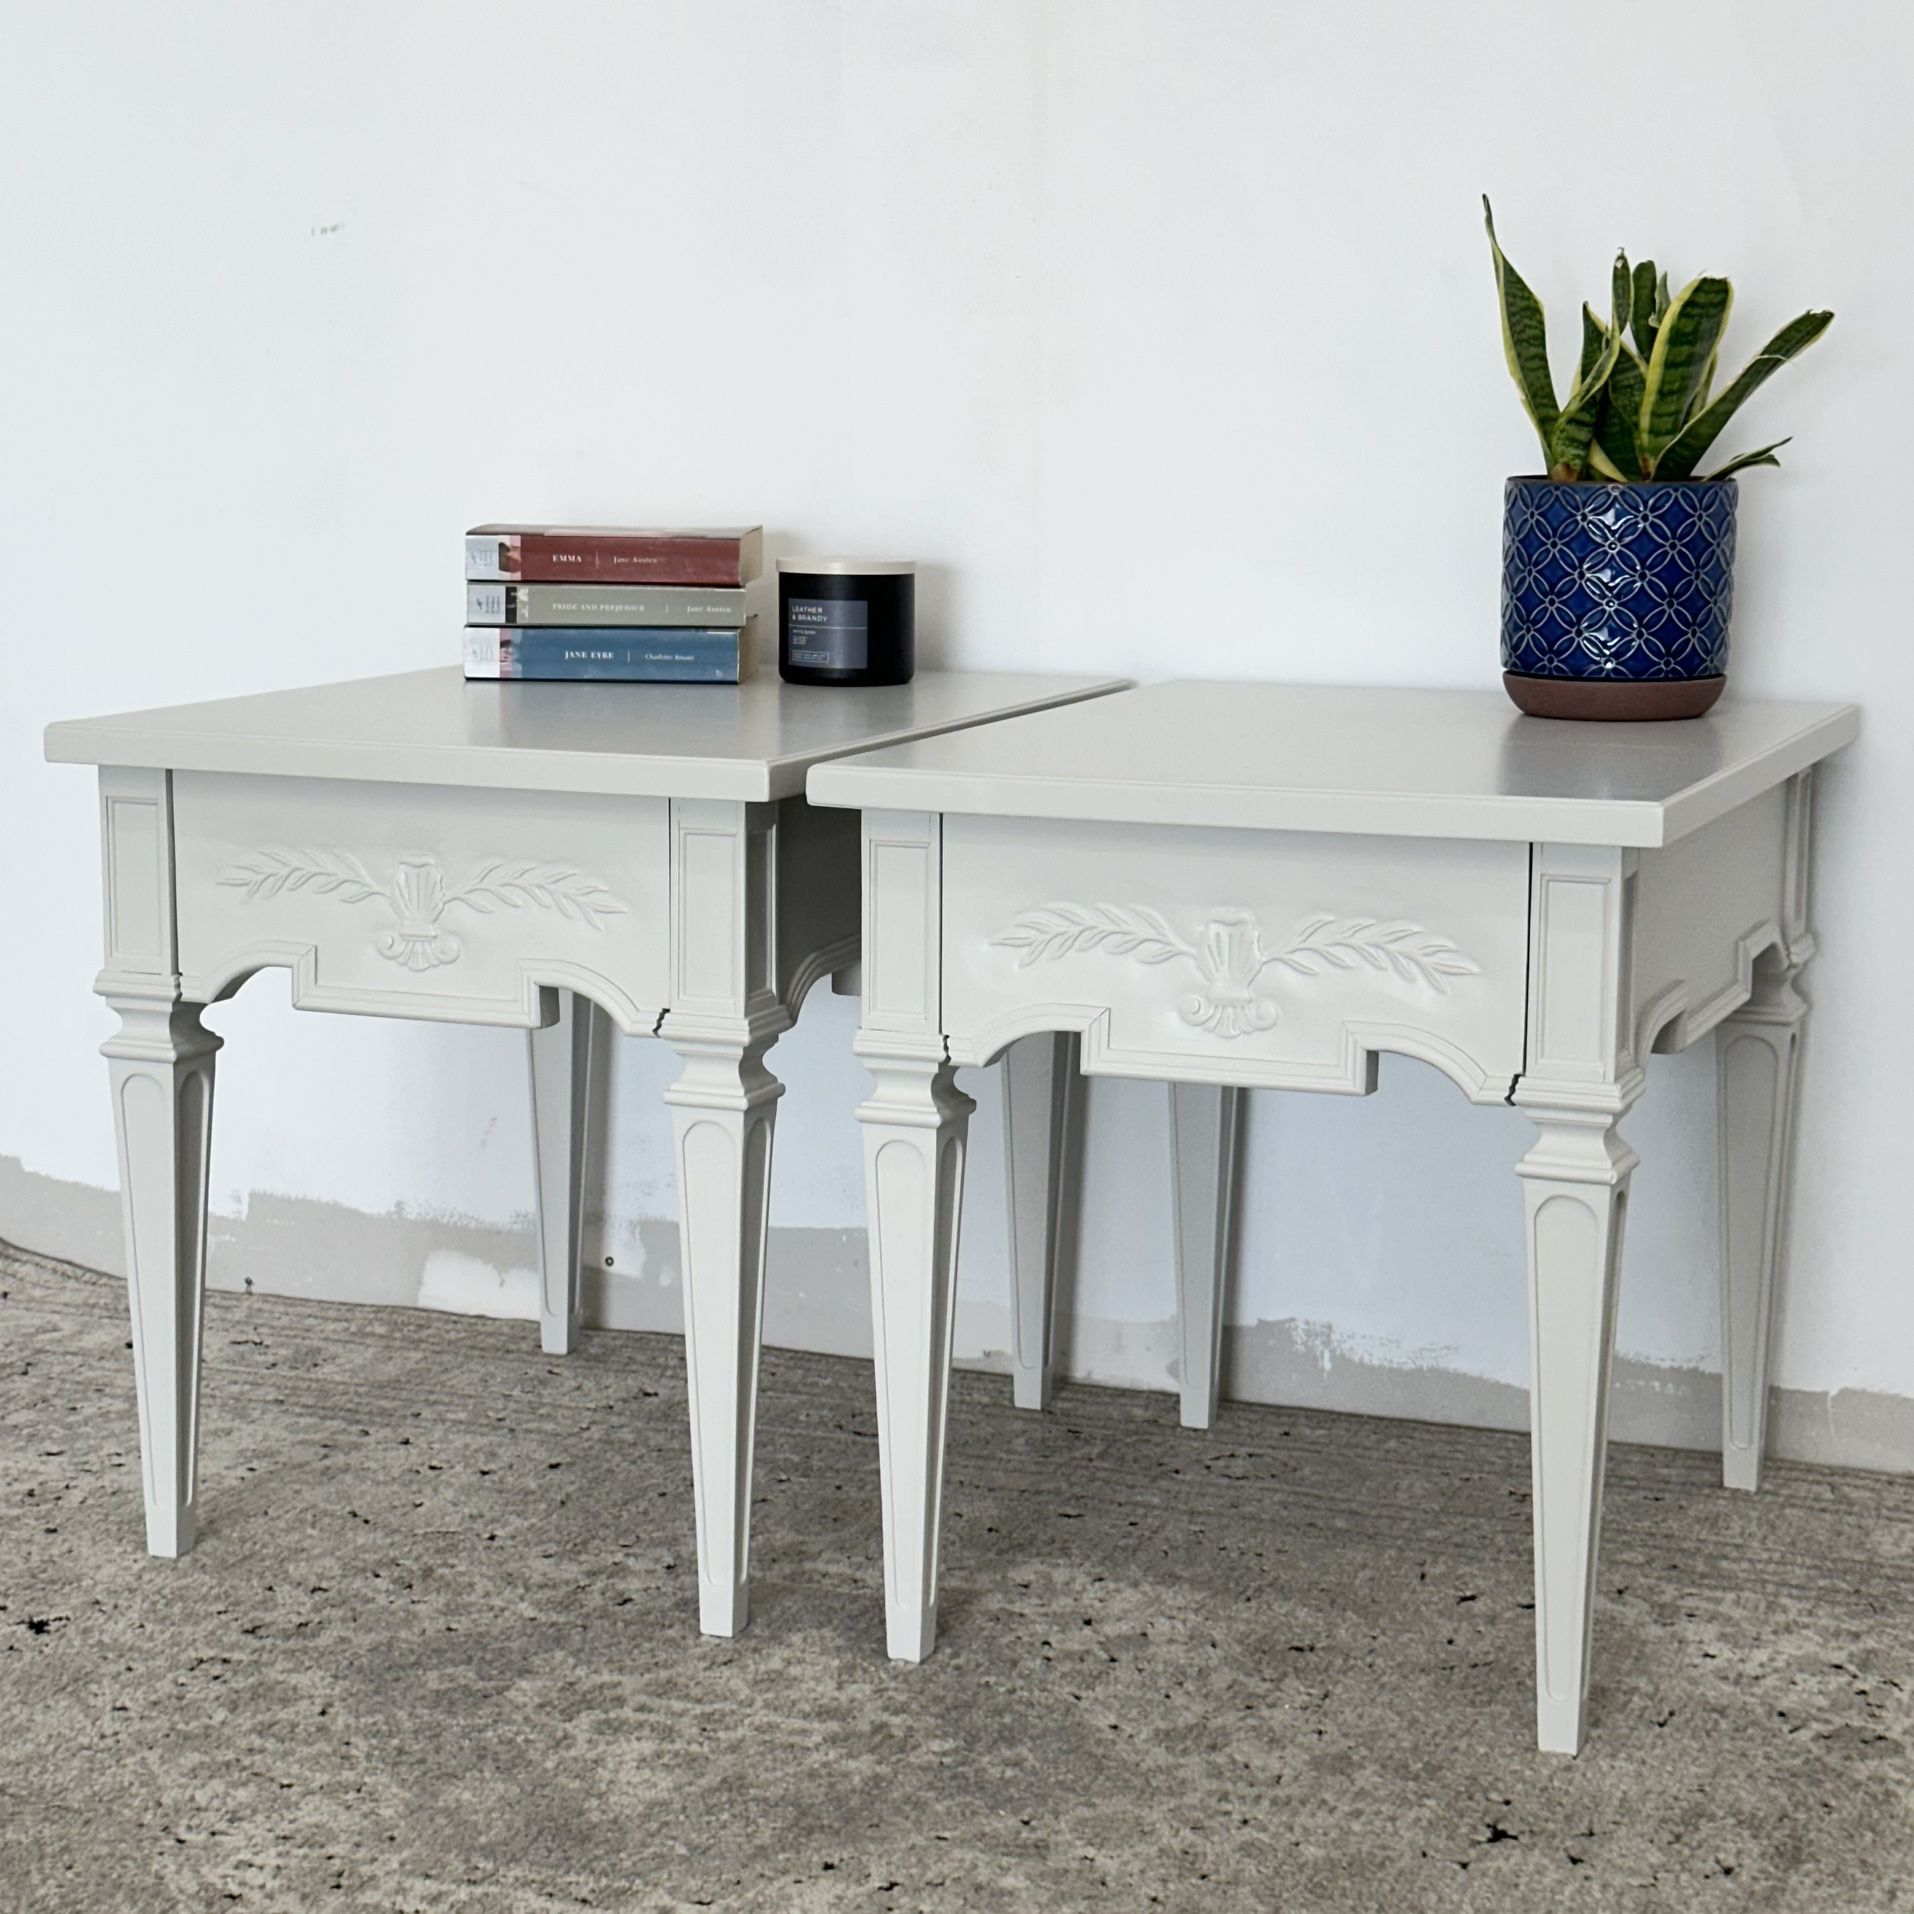 Drexel End Tables | Pair of Gray Side Tables | Accent Tables